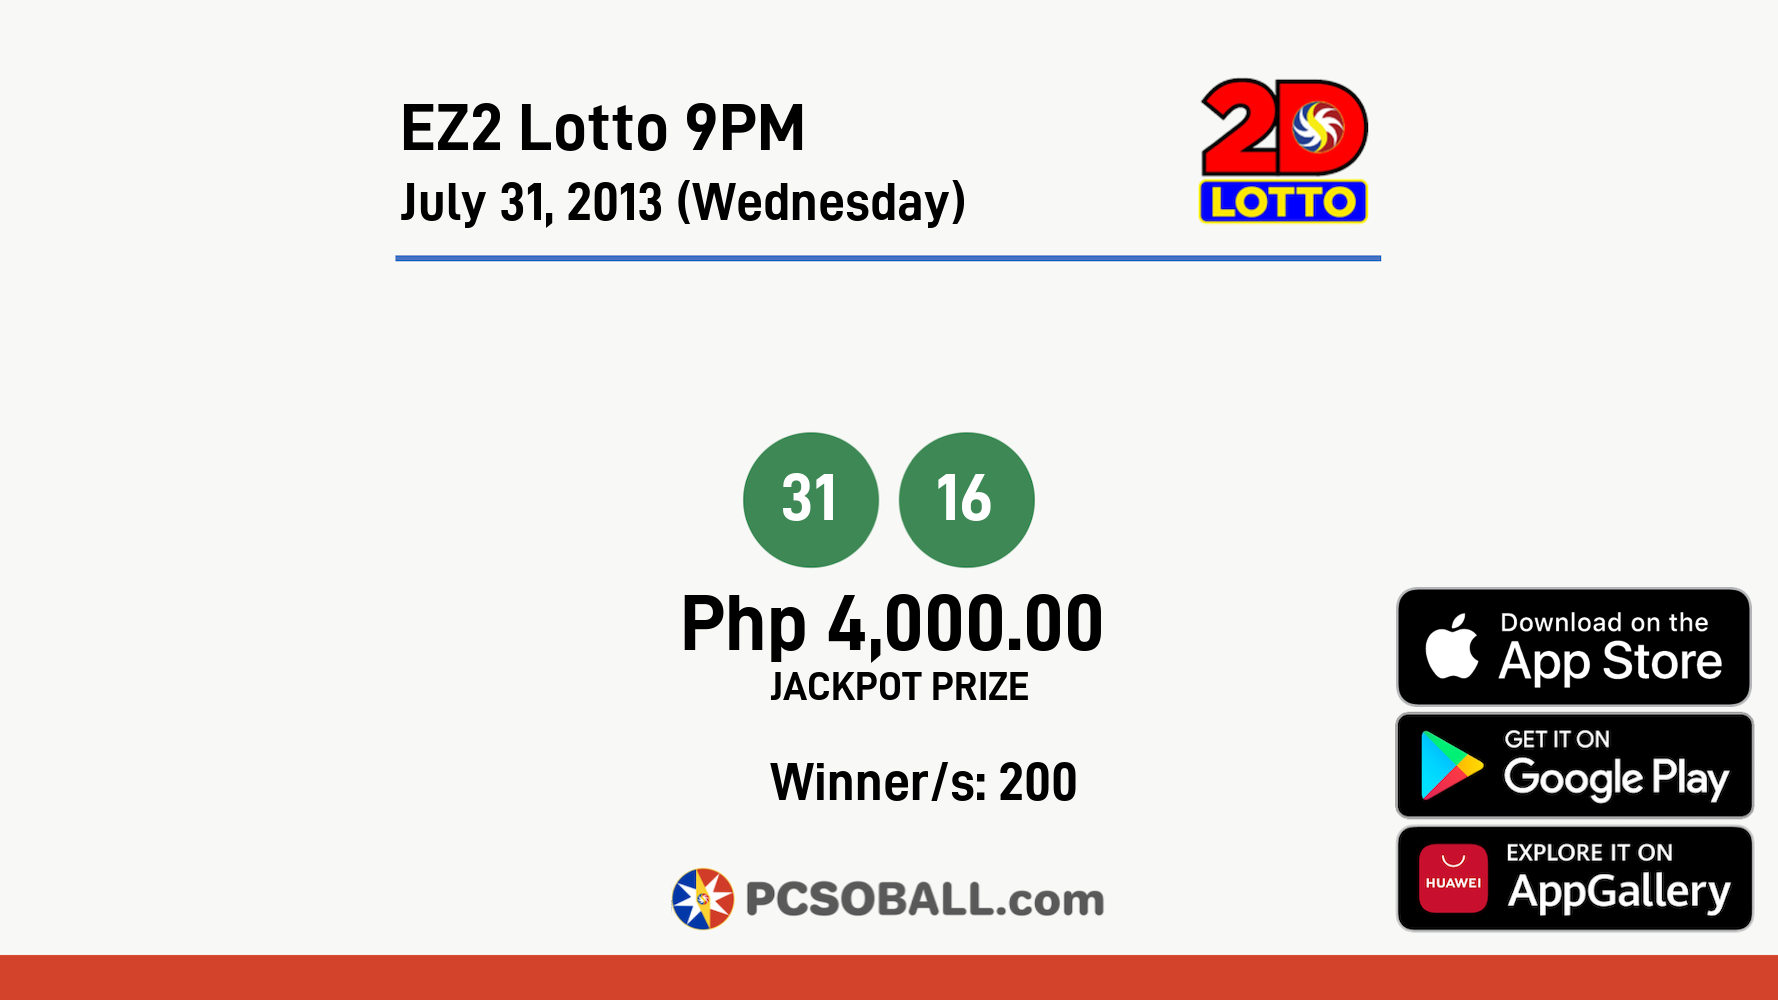 EZ2 Lotto 9PM July 31, 2013 (Wednesday) Result